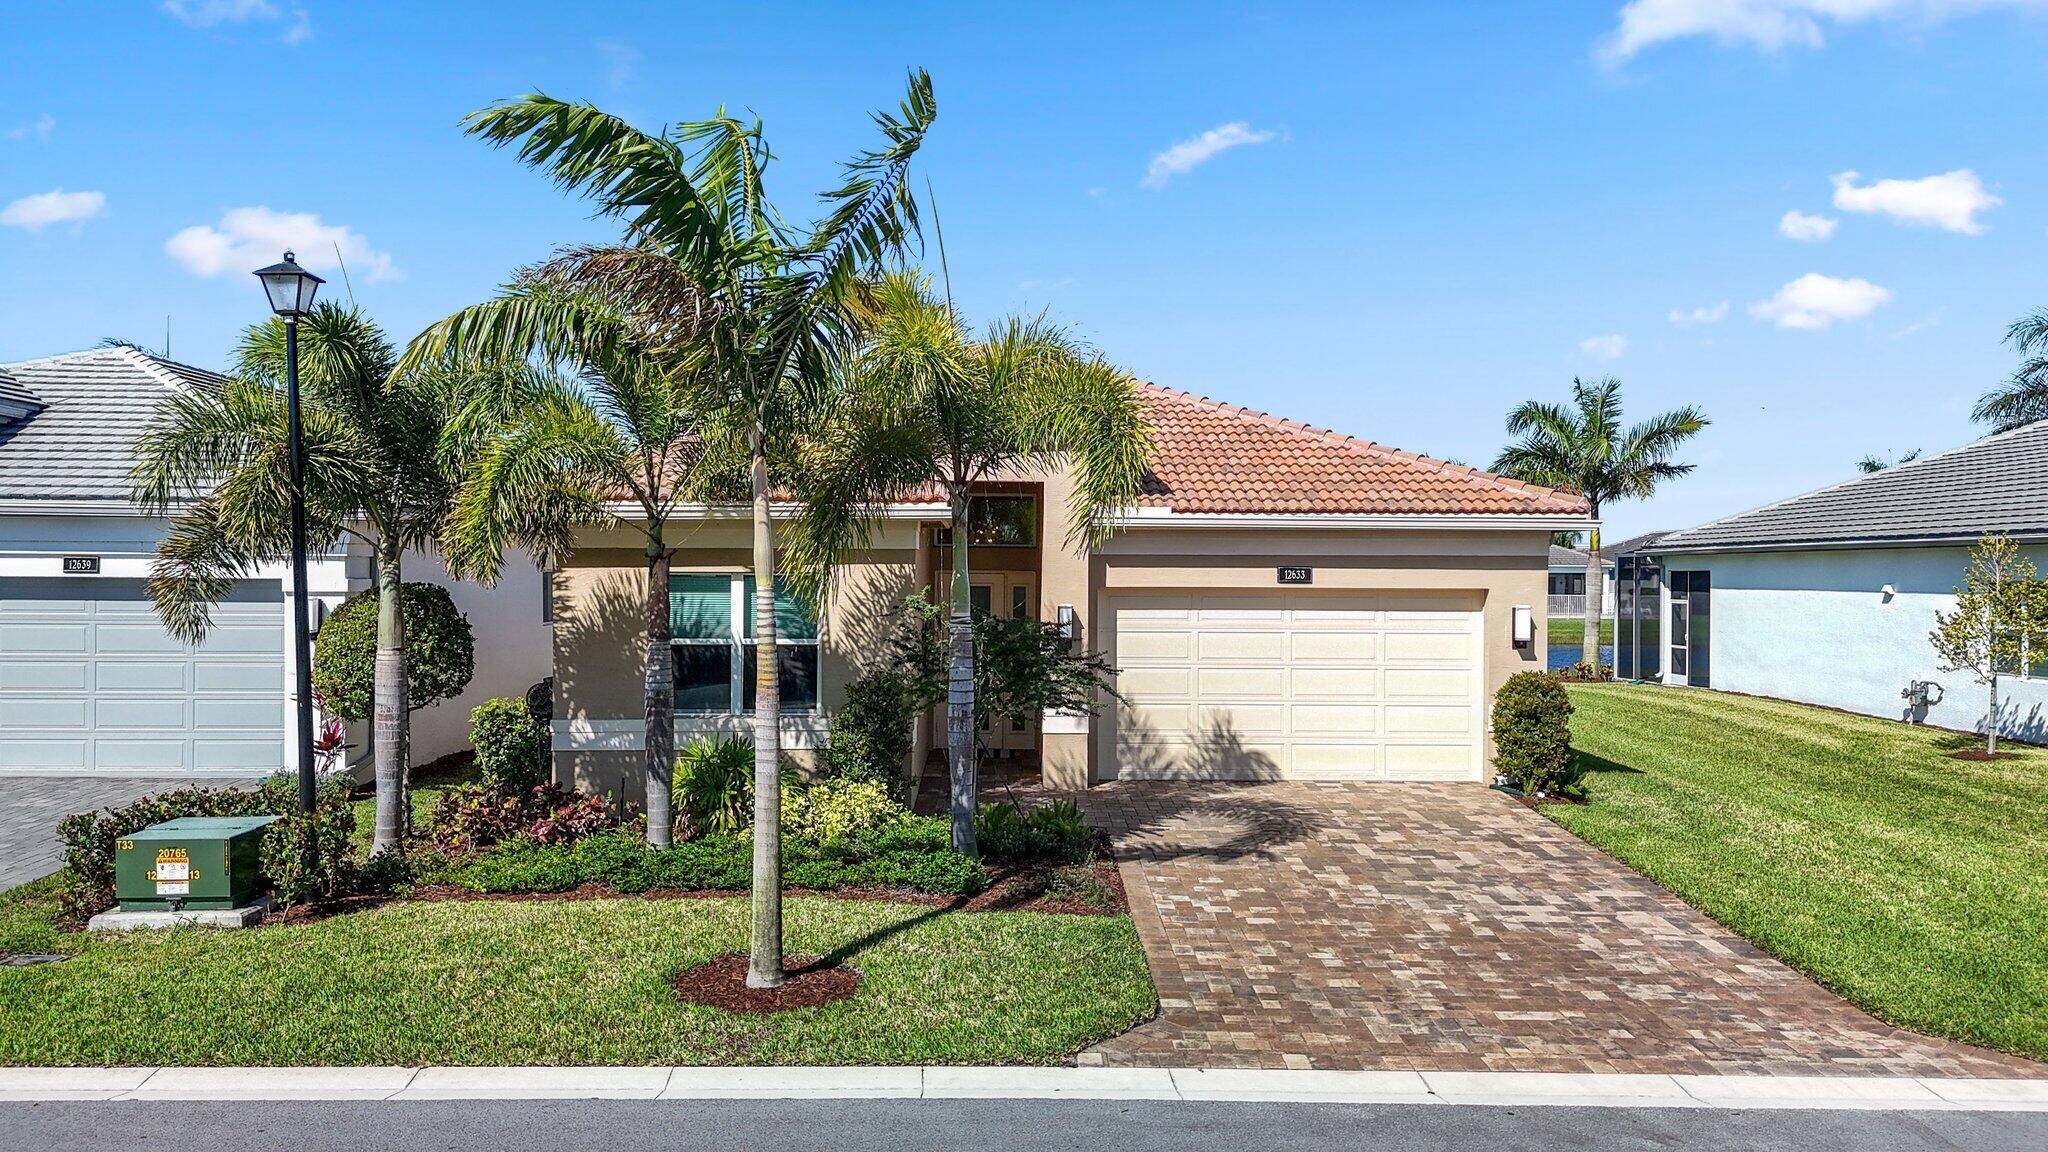 Experience the epitome of luxury living at 12633 Vincenza Way, a stunning 3 bedroom, 2 bathroom Ruby model in Valencia Sound, the ultimate 55 development in Boynton Beach, FL.